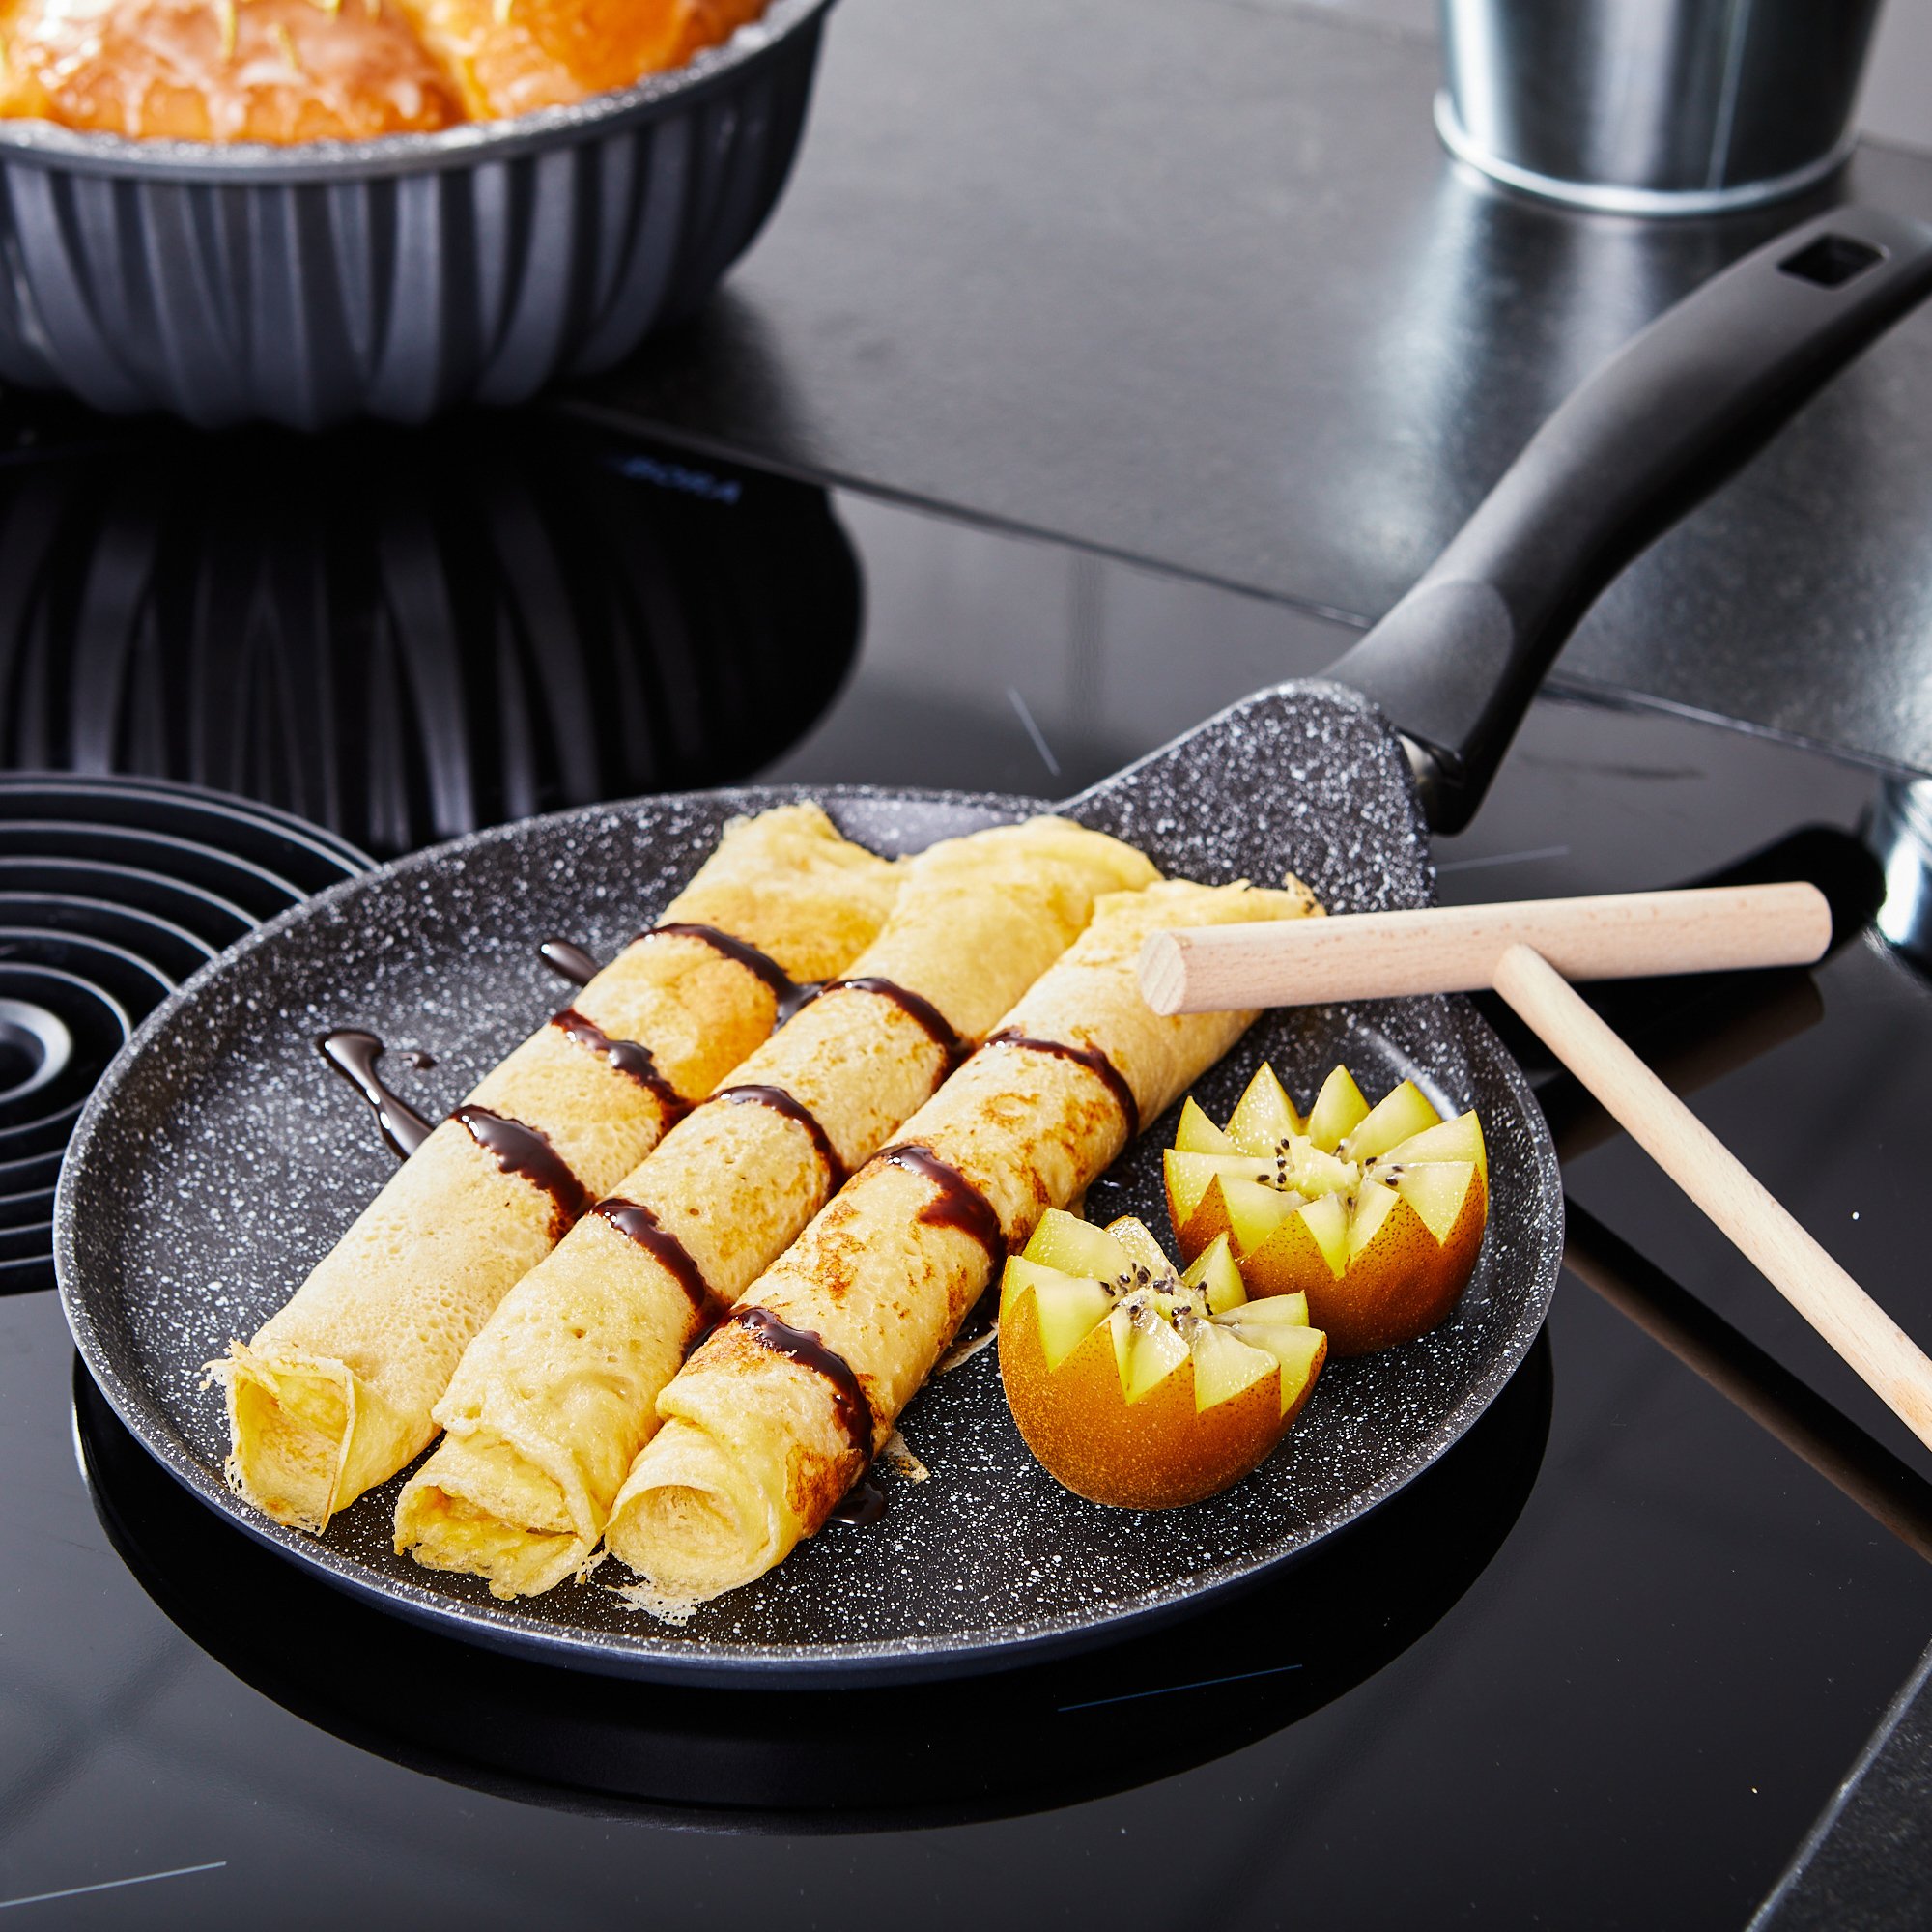 STONELINE® Classic Crêpes Pan 25 cm, pan non-stick coated with batter distributor, suitable for induction